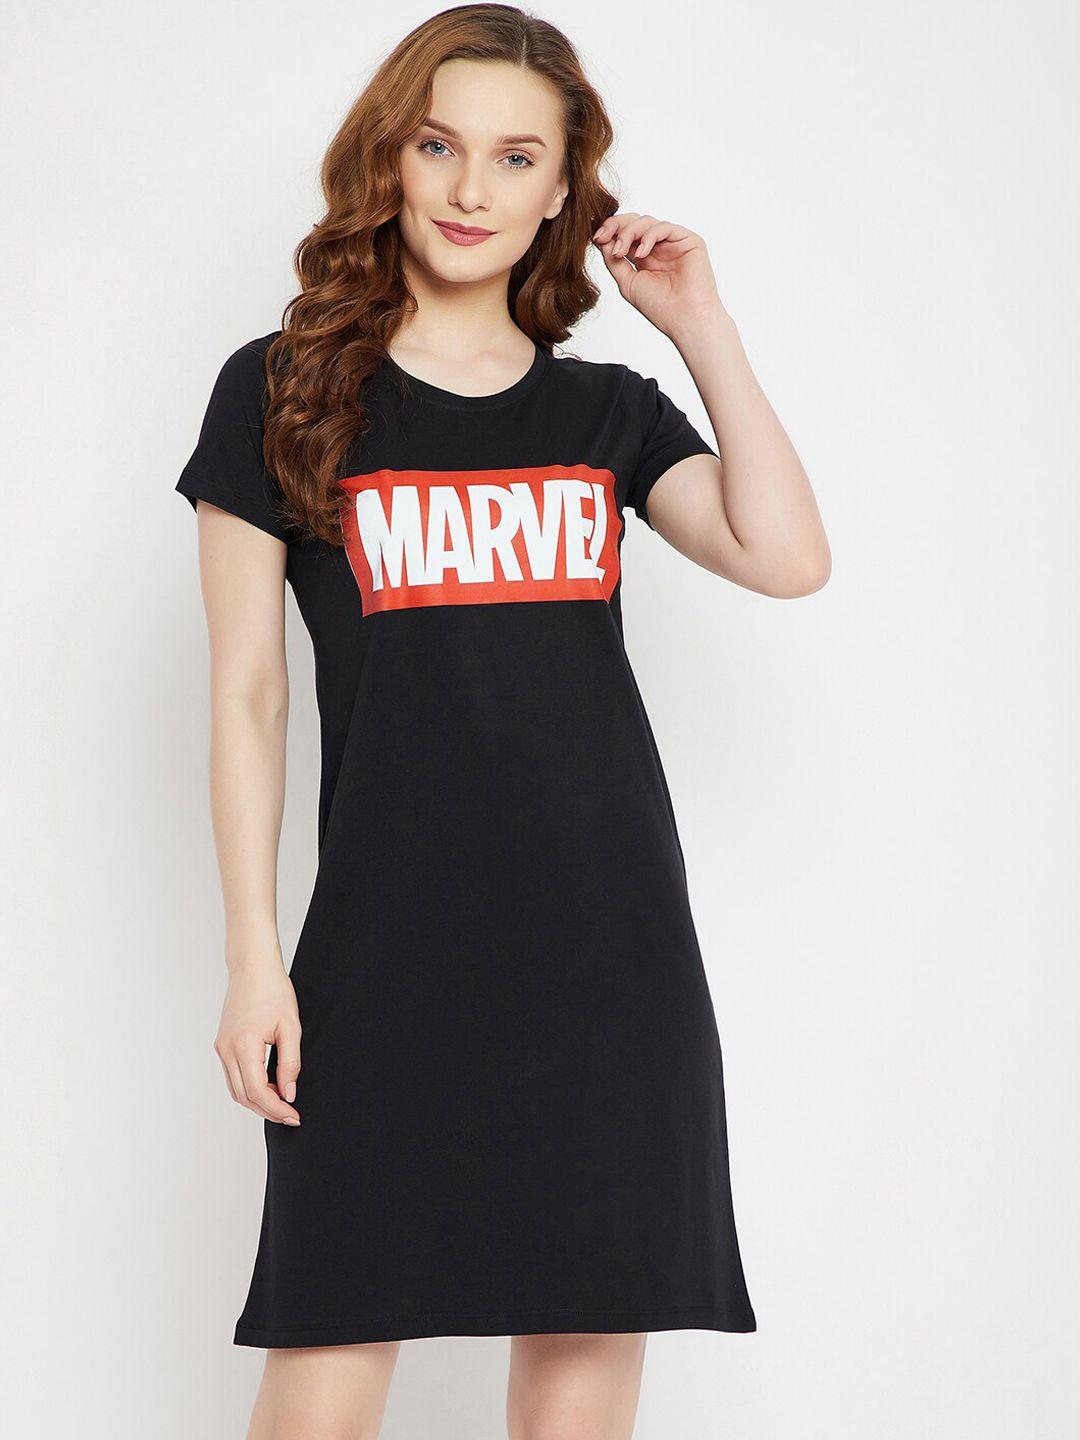 disney by wear your mind women black & red marvel avengers printed pure cotton sleep shirt